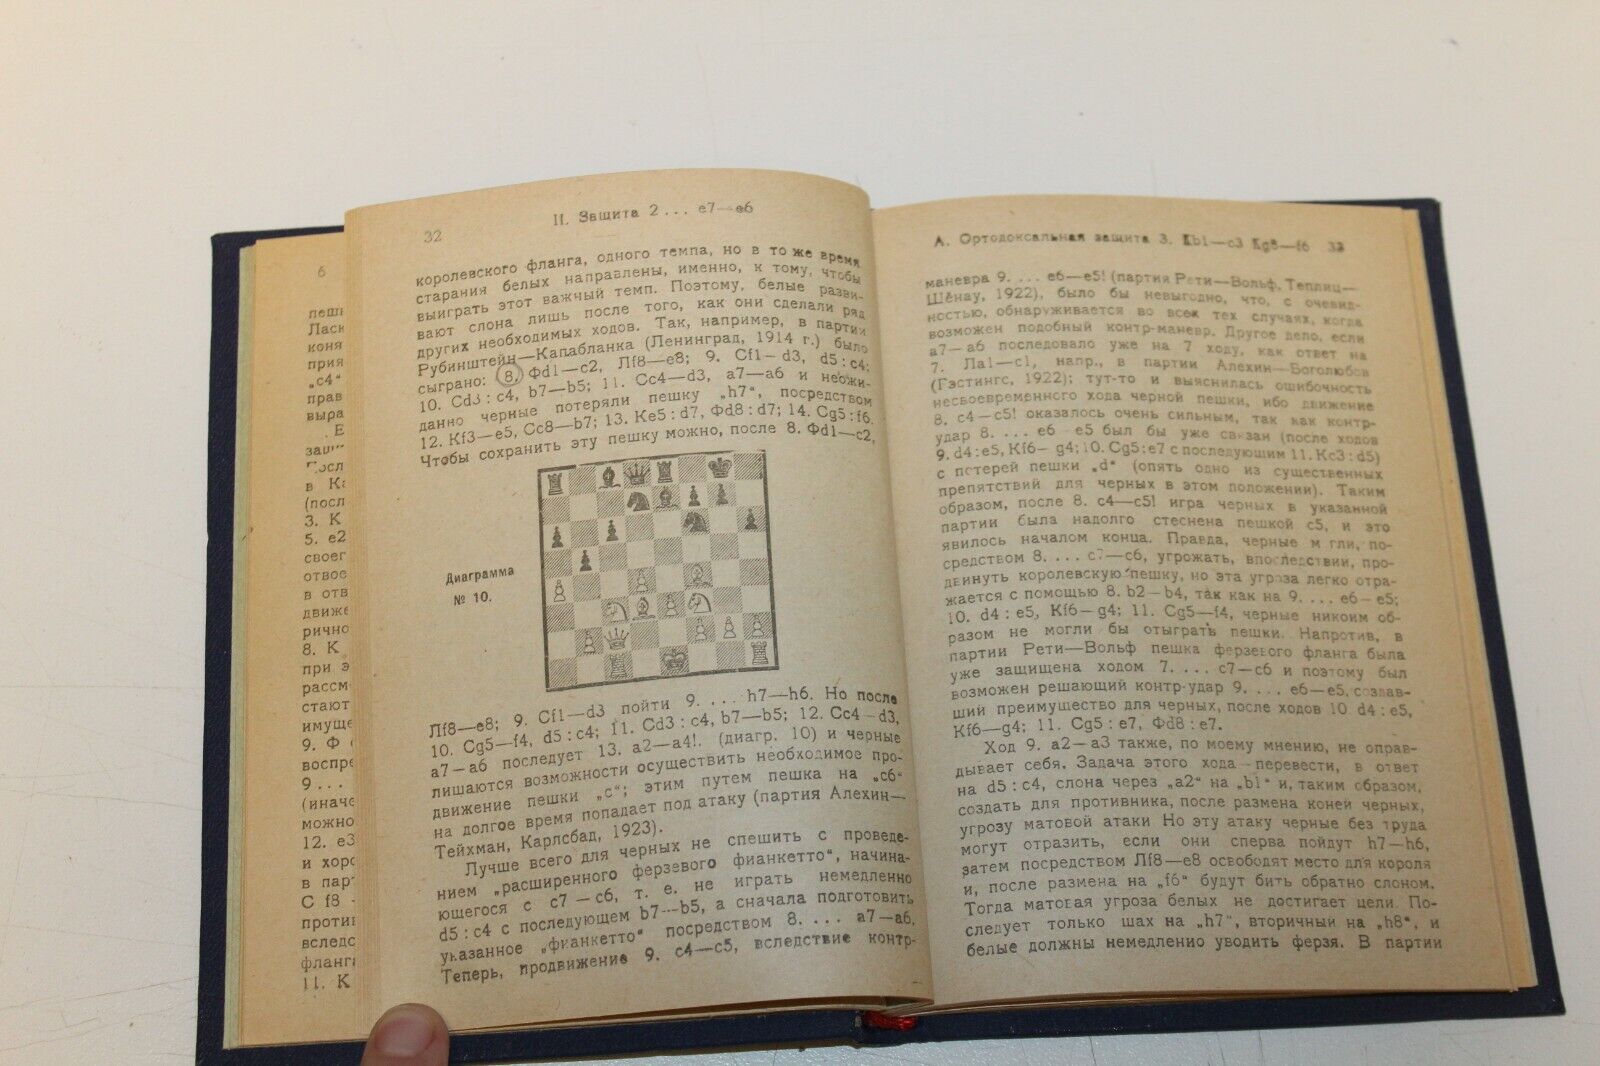 11538.Russian chess book: S. Tarrasch. 1925.Protection of the Queen's gambit